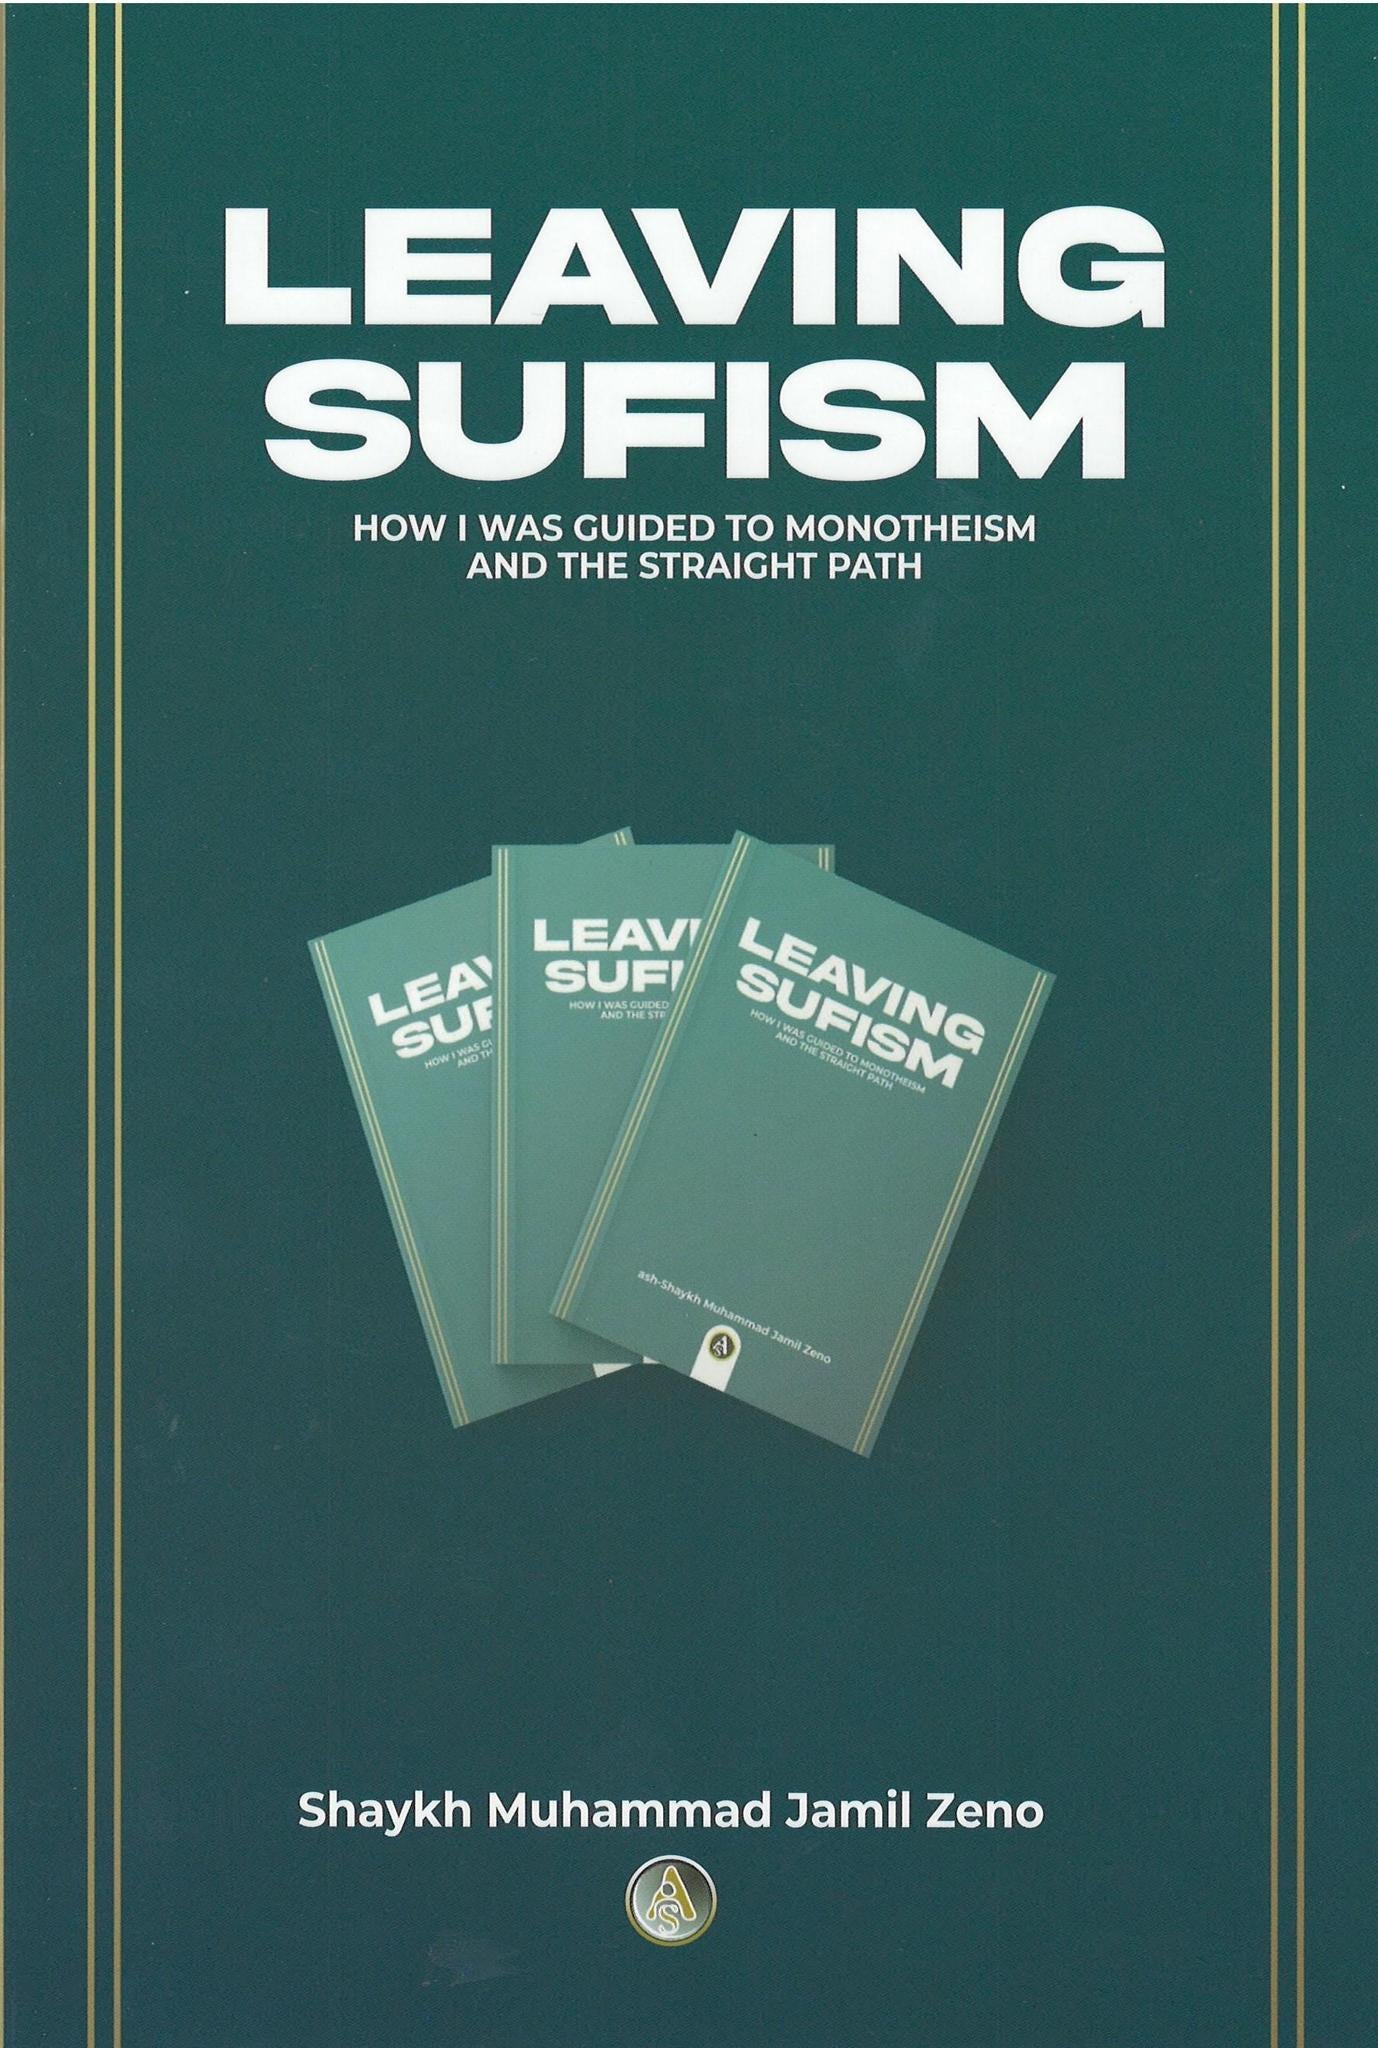 Leaving Sufism - How I Was Guided To Monotheism And The Straight Path